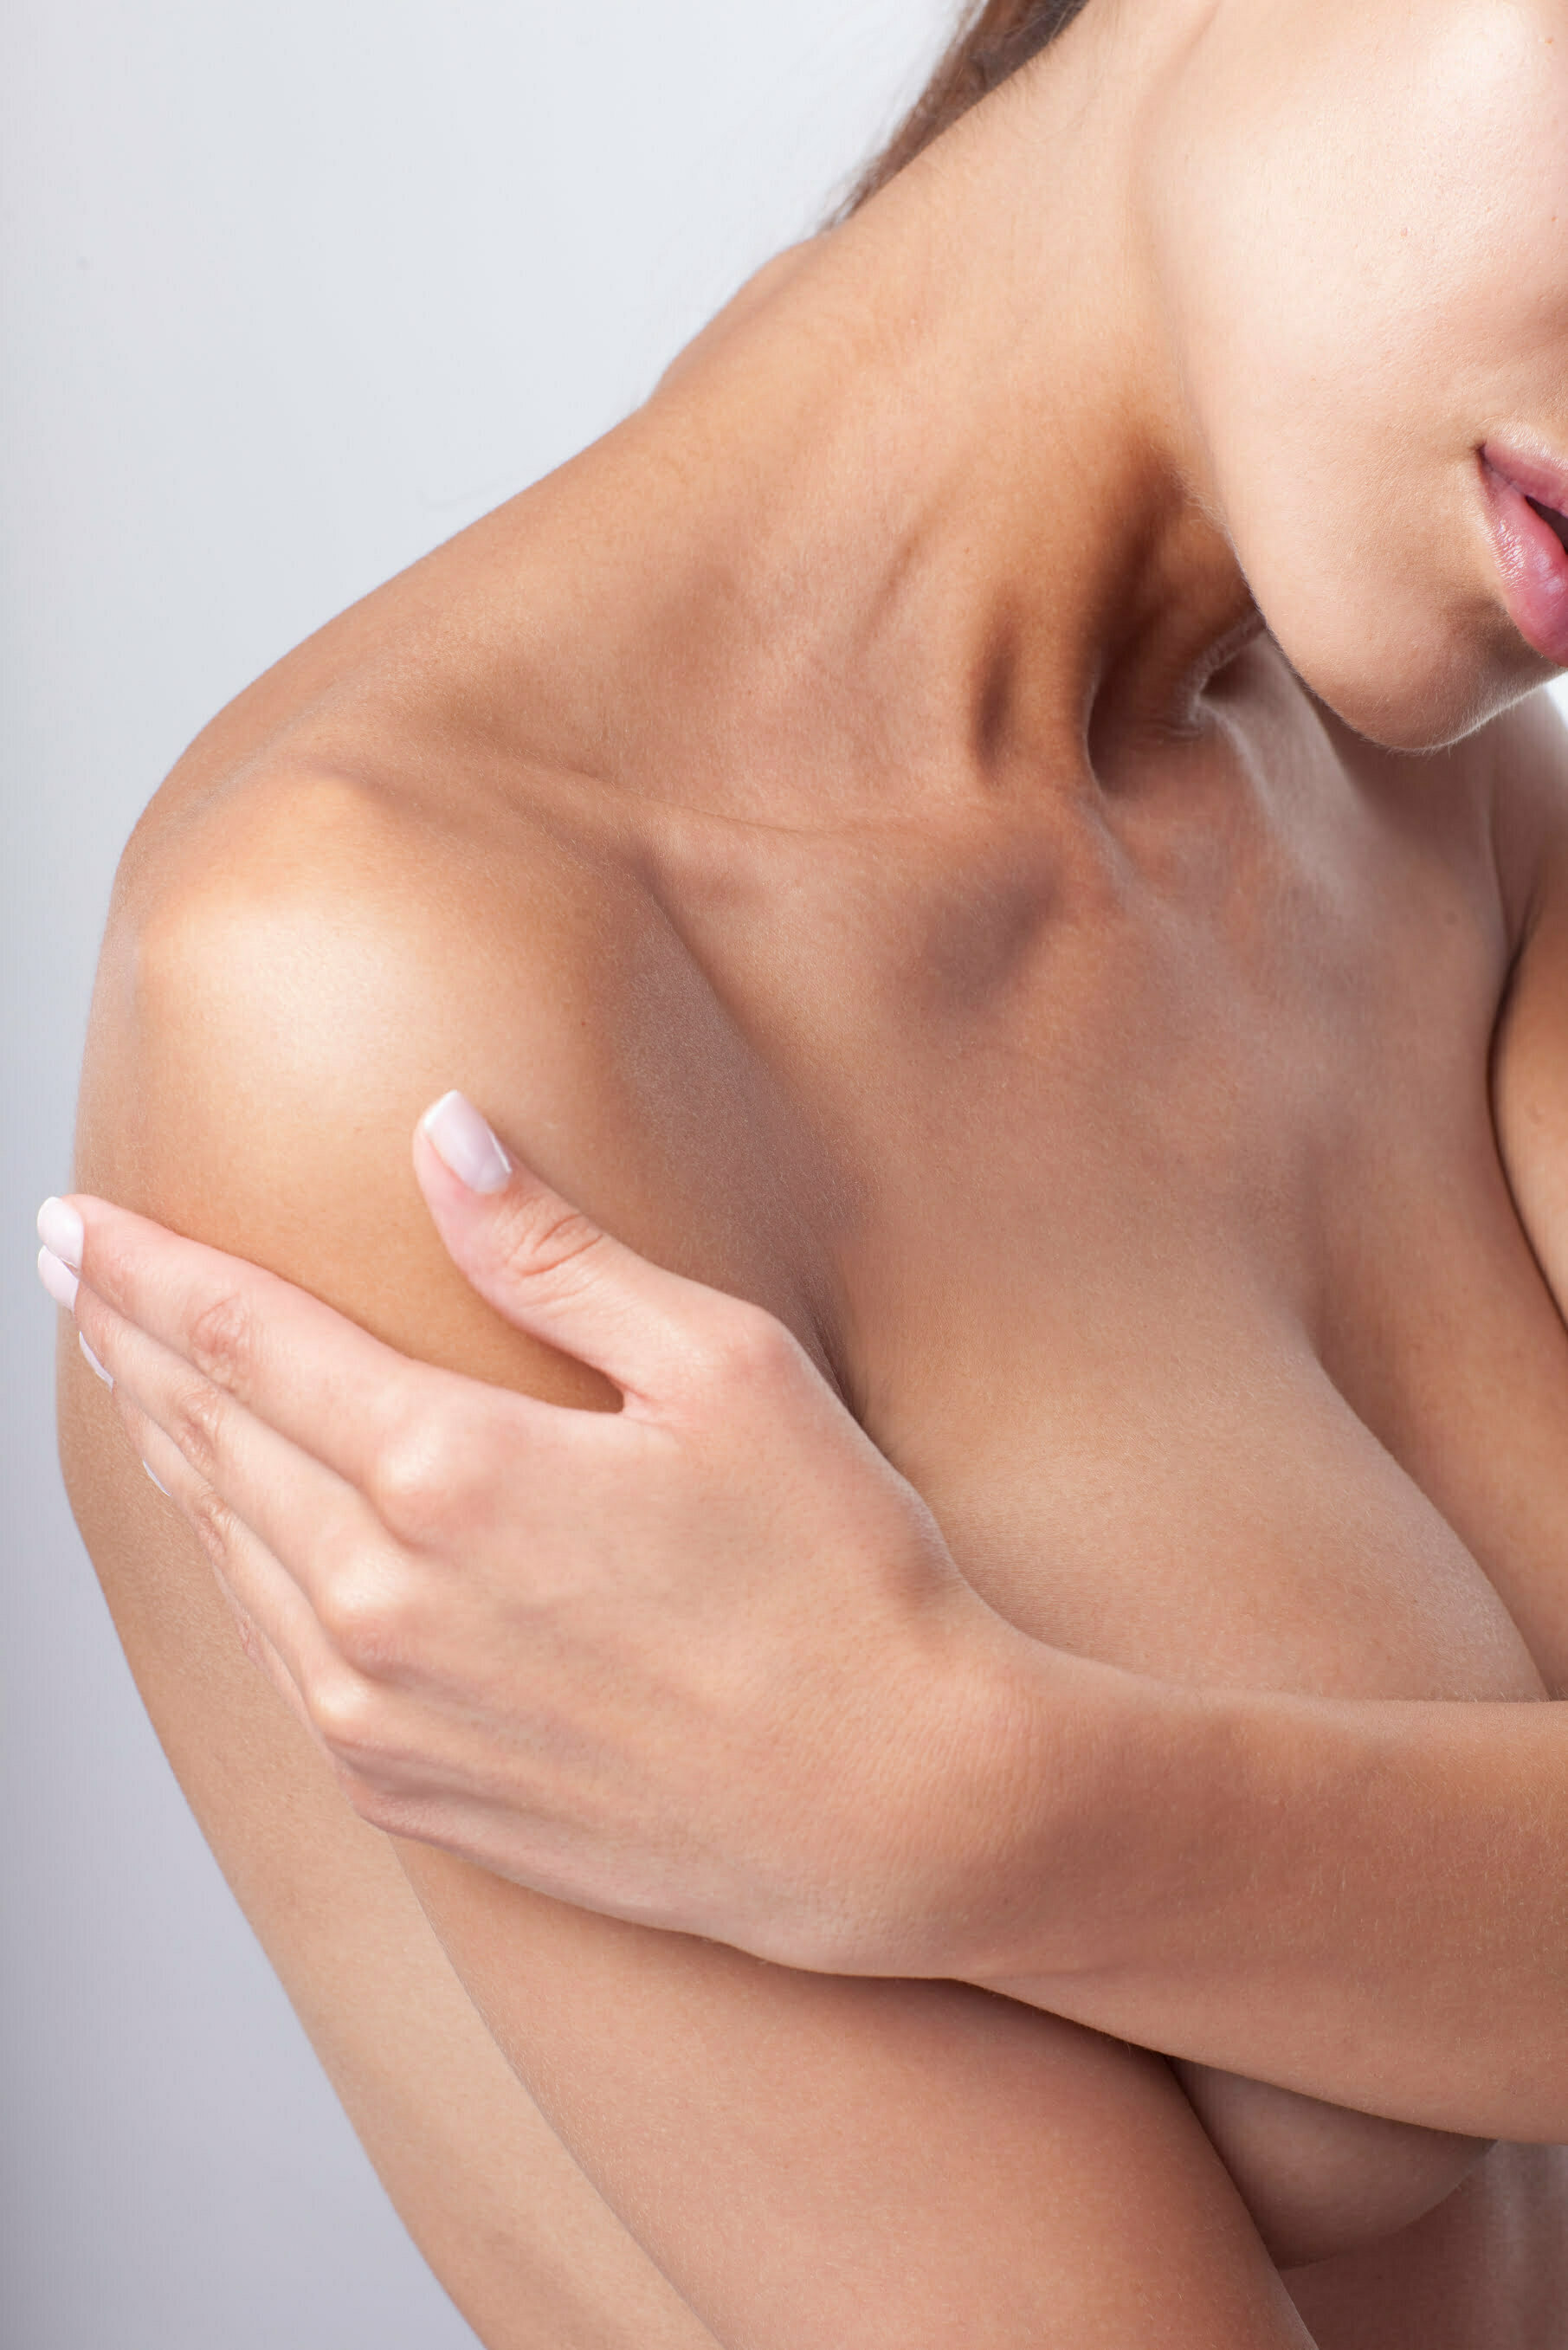 Interested in Breast Augmentation Without the Scars? We've Got You Covered  - Dr. Pancholi